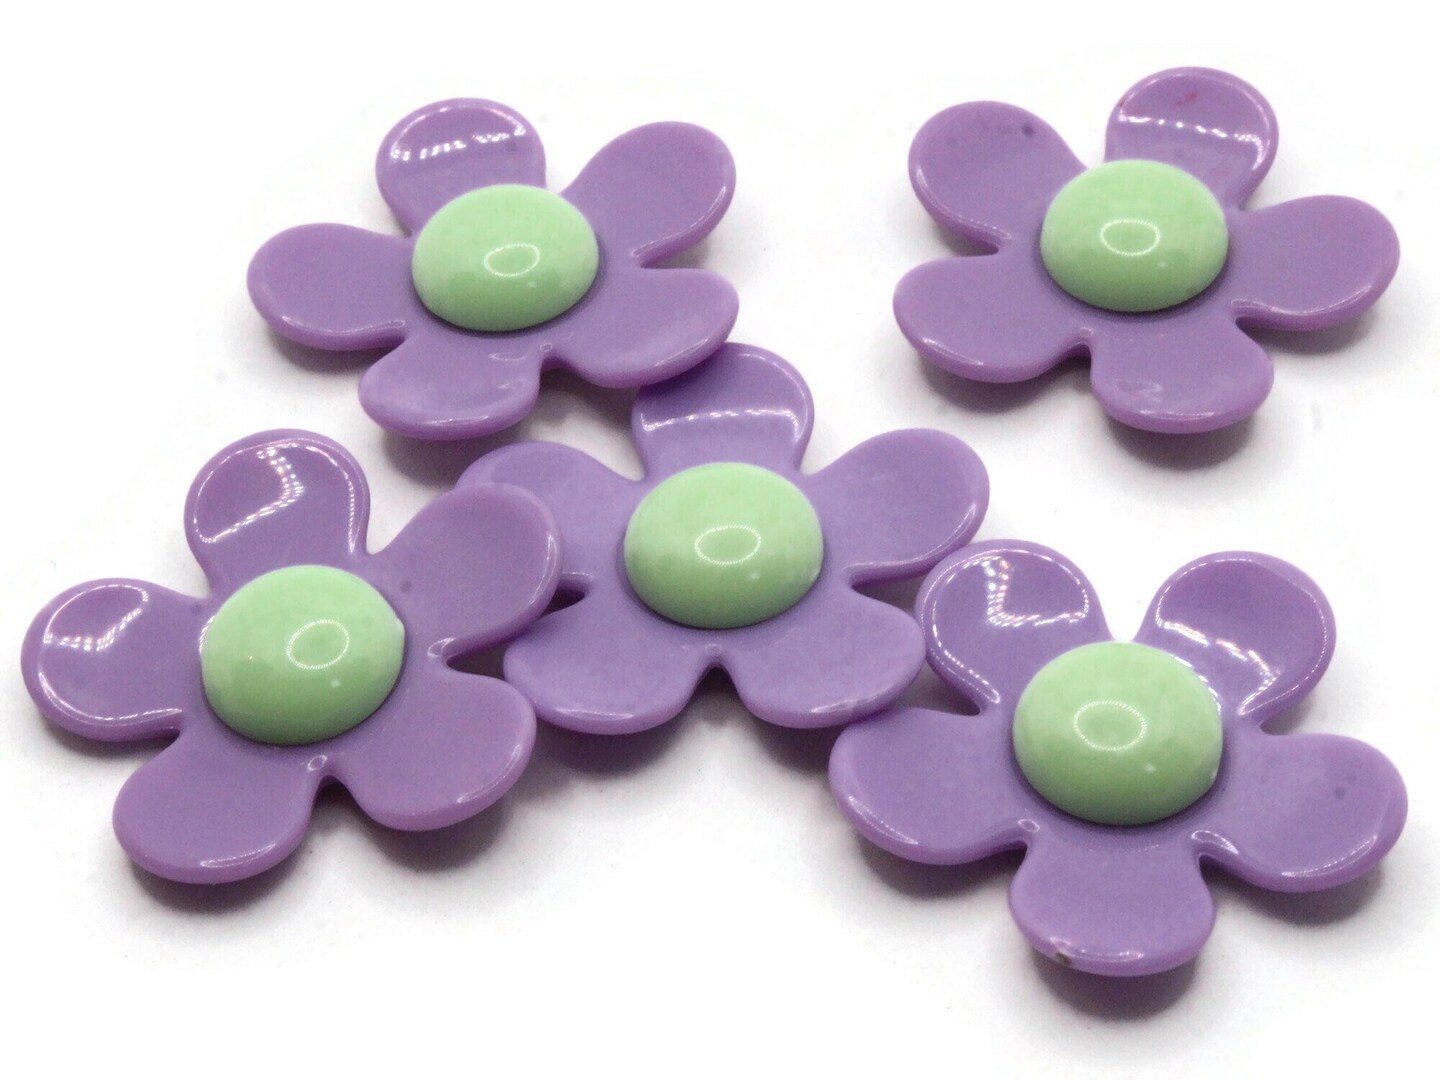 5 36mm Mixed Color Daisy Large Plastic Flower Beads by Smileyboy Beads | Michaels